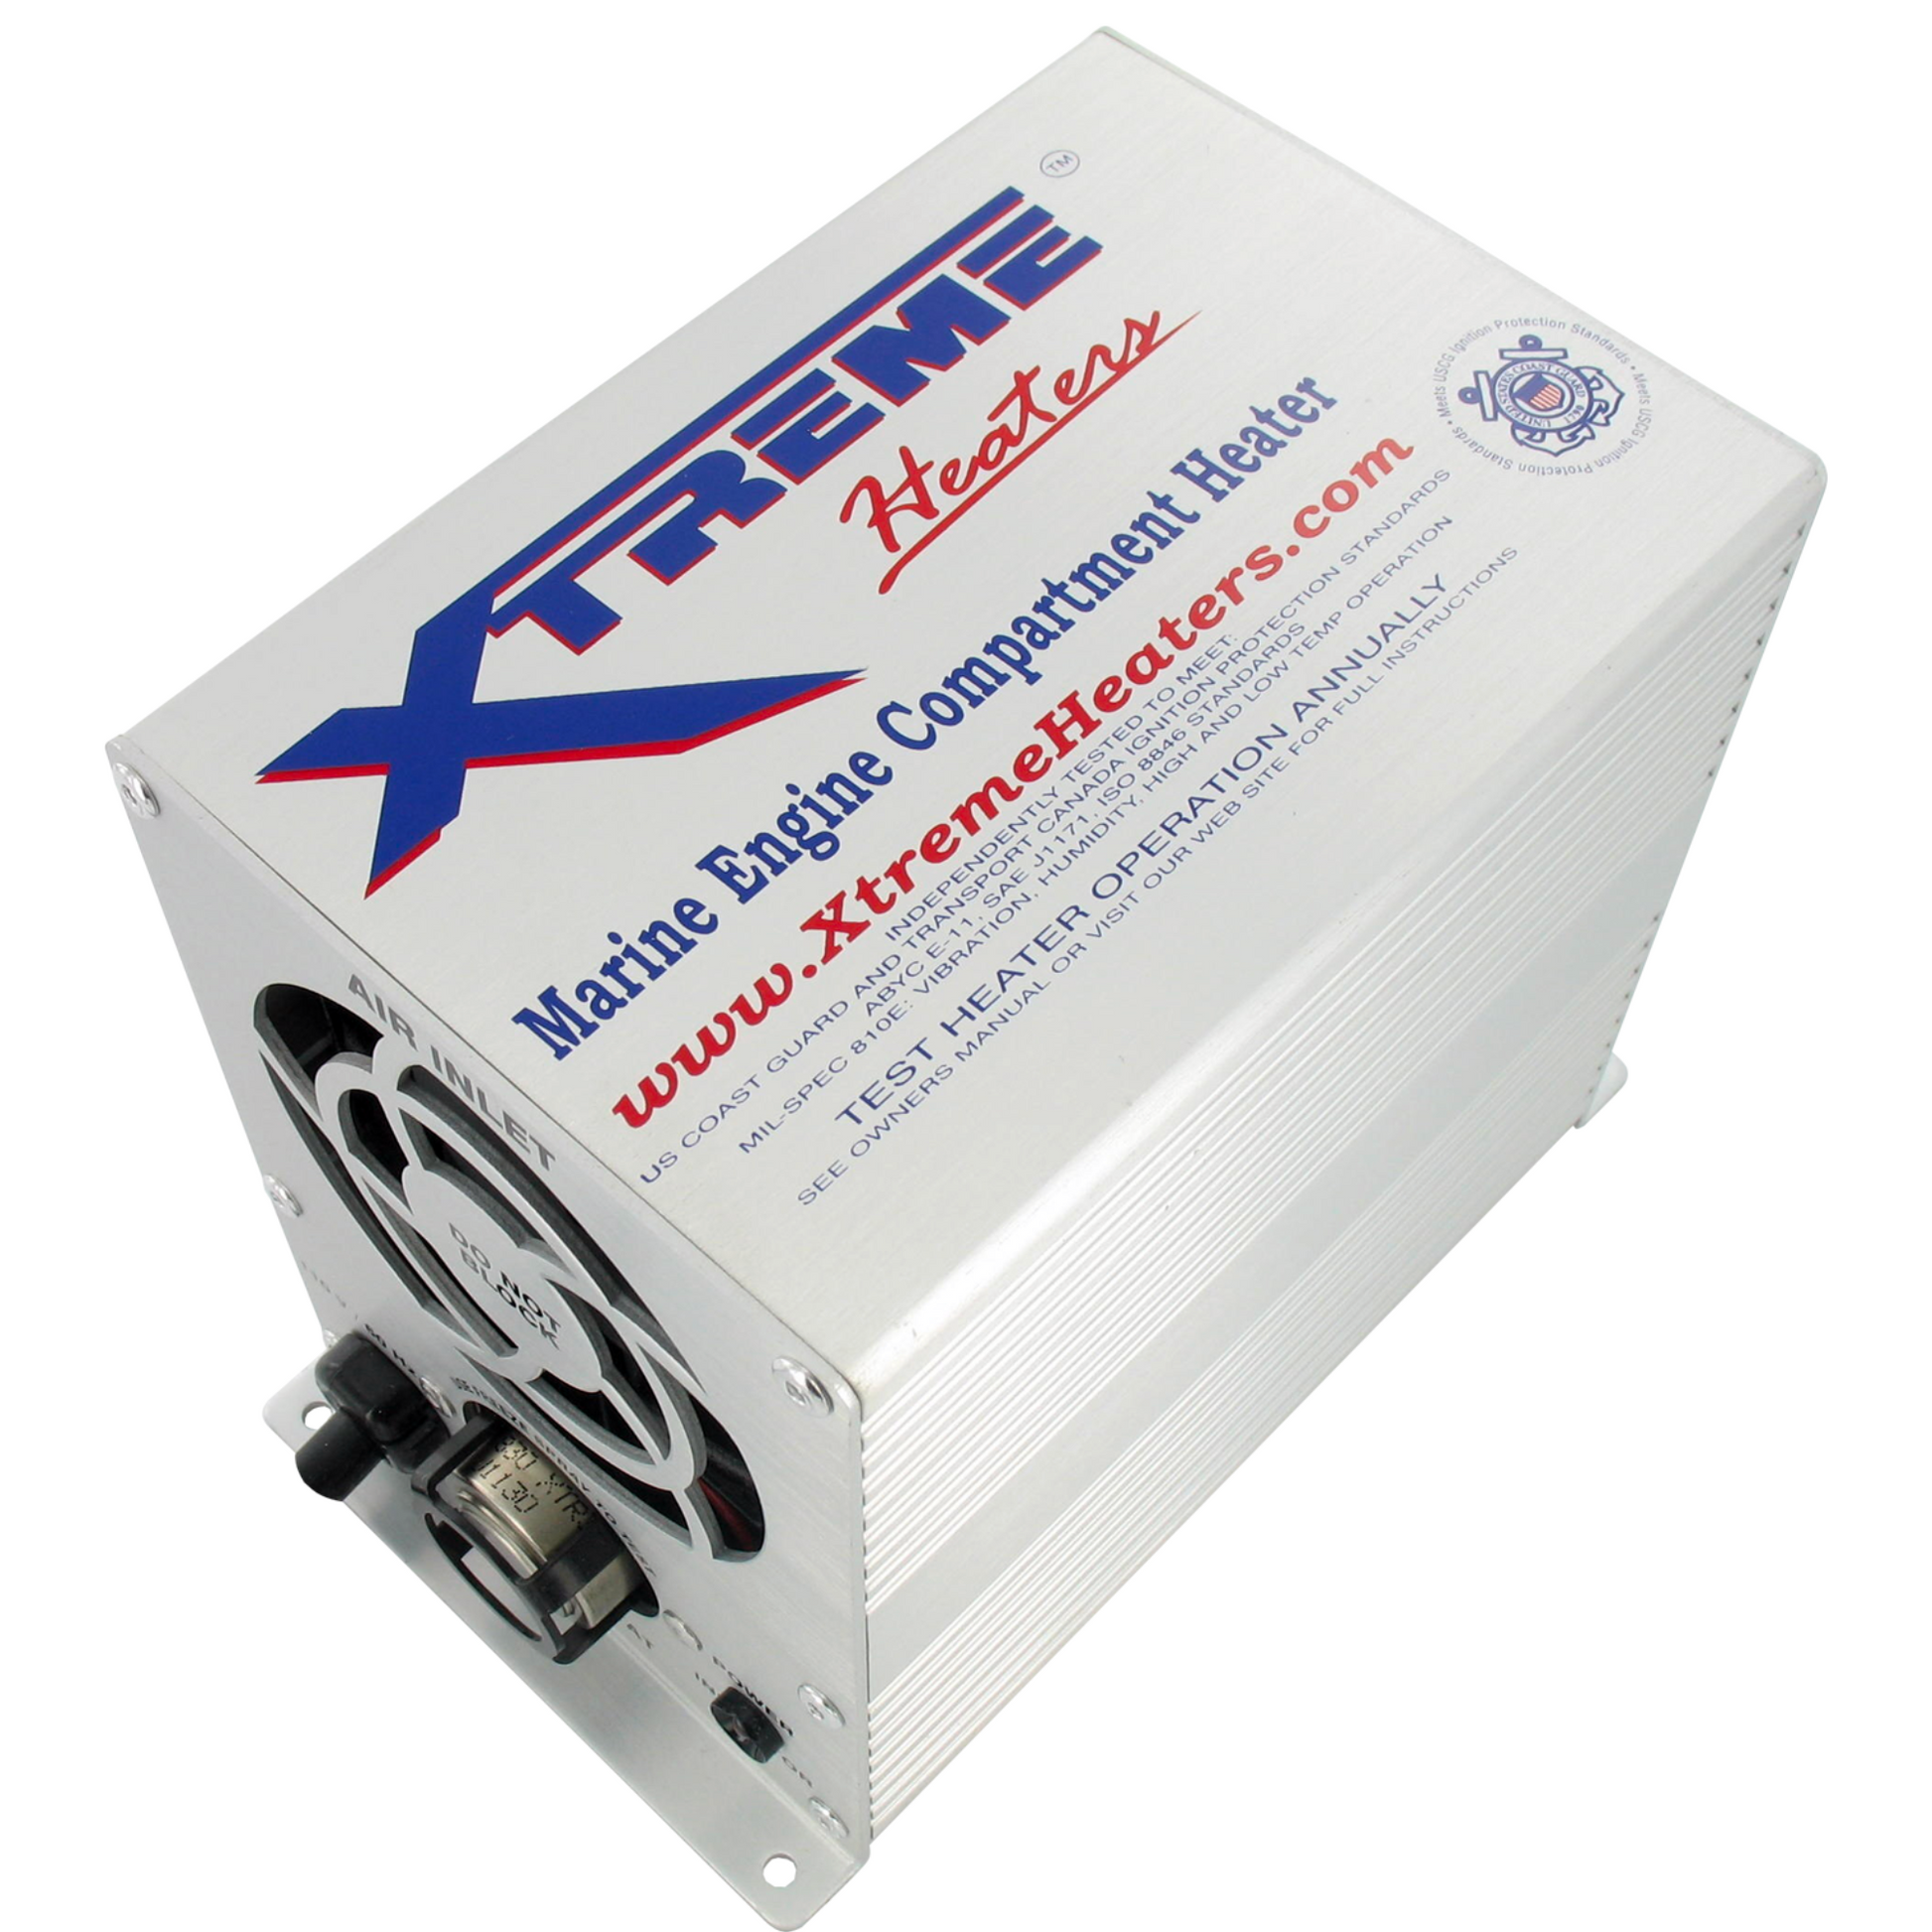 Xtreme-Heater-Small-Top-View-(Older-Model)